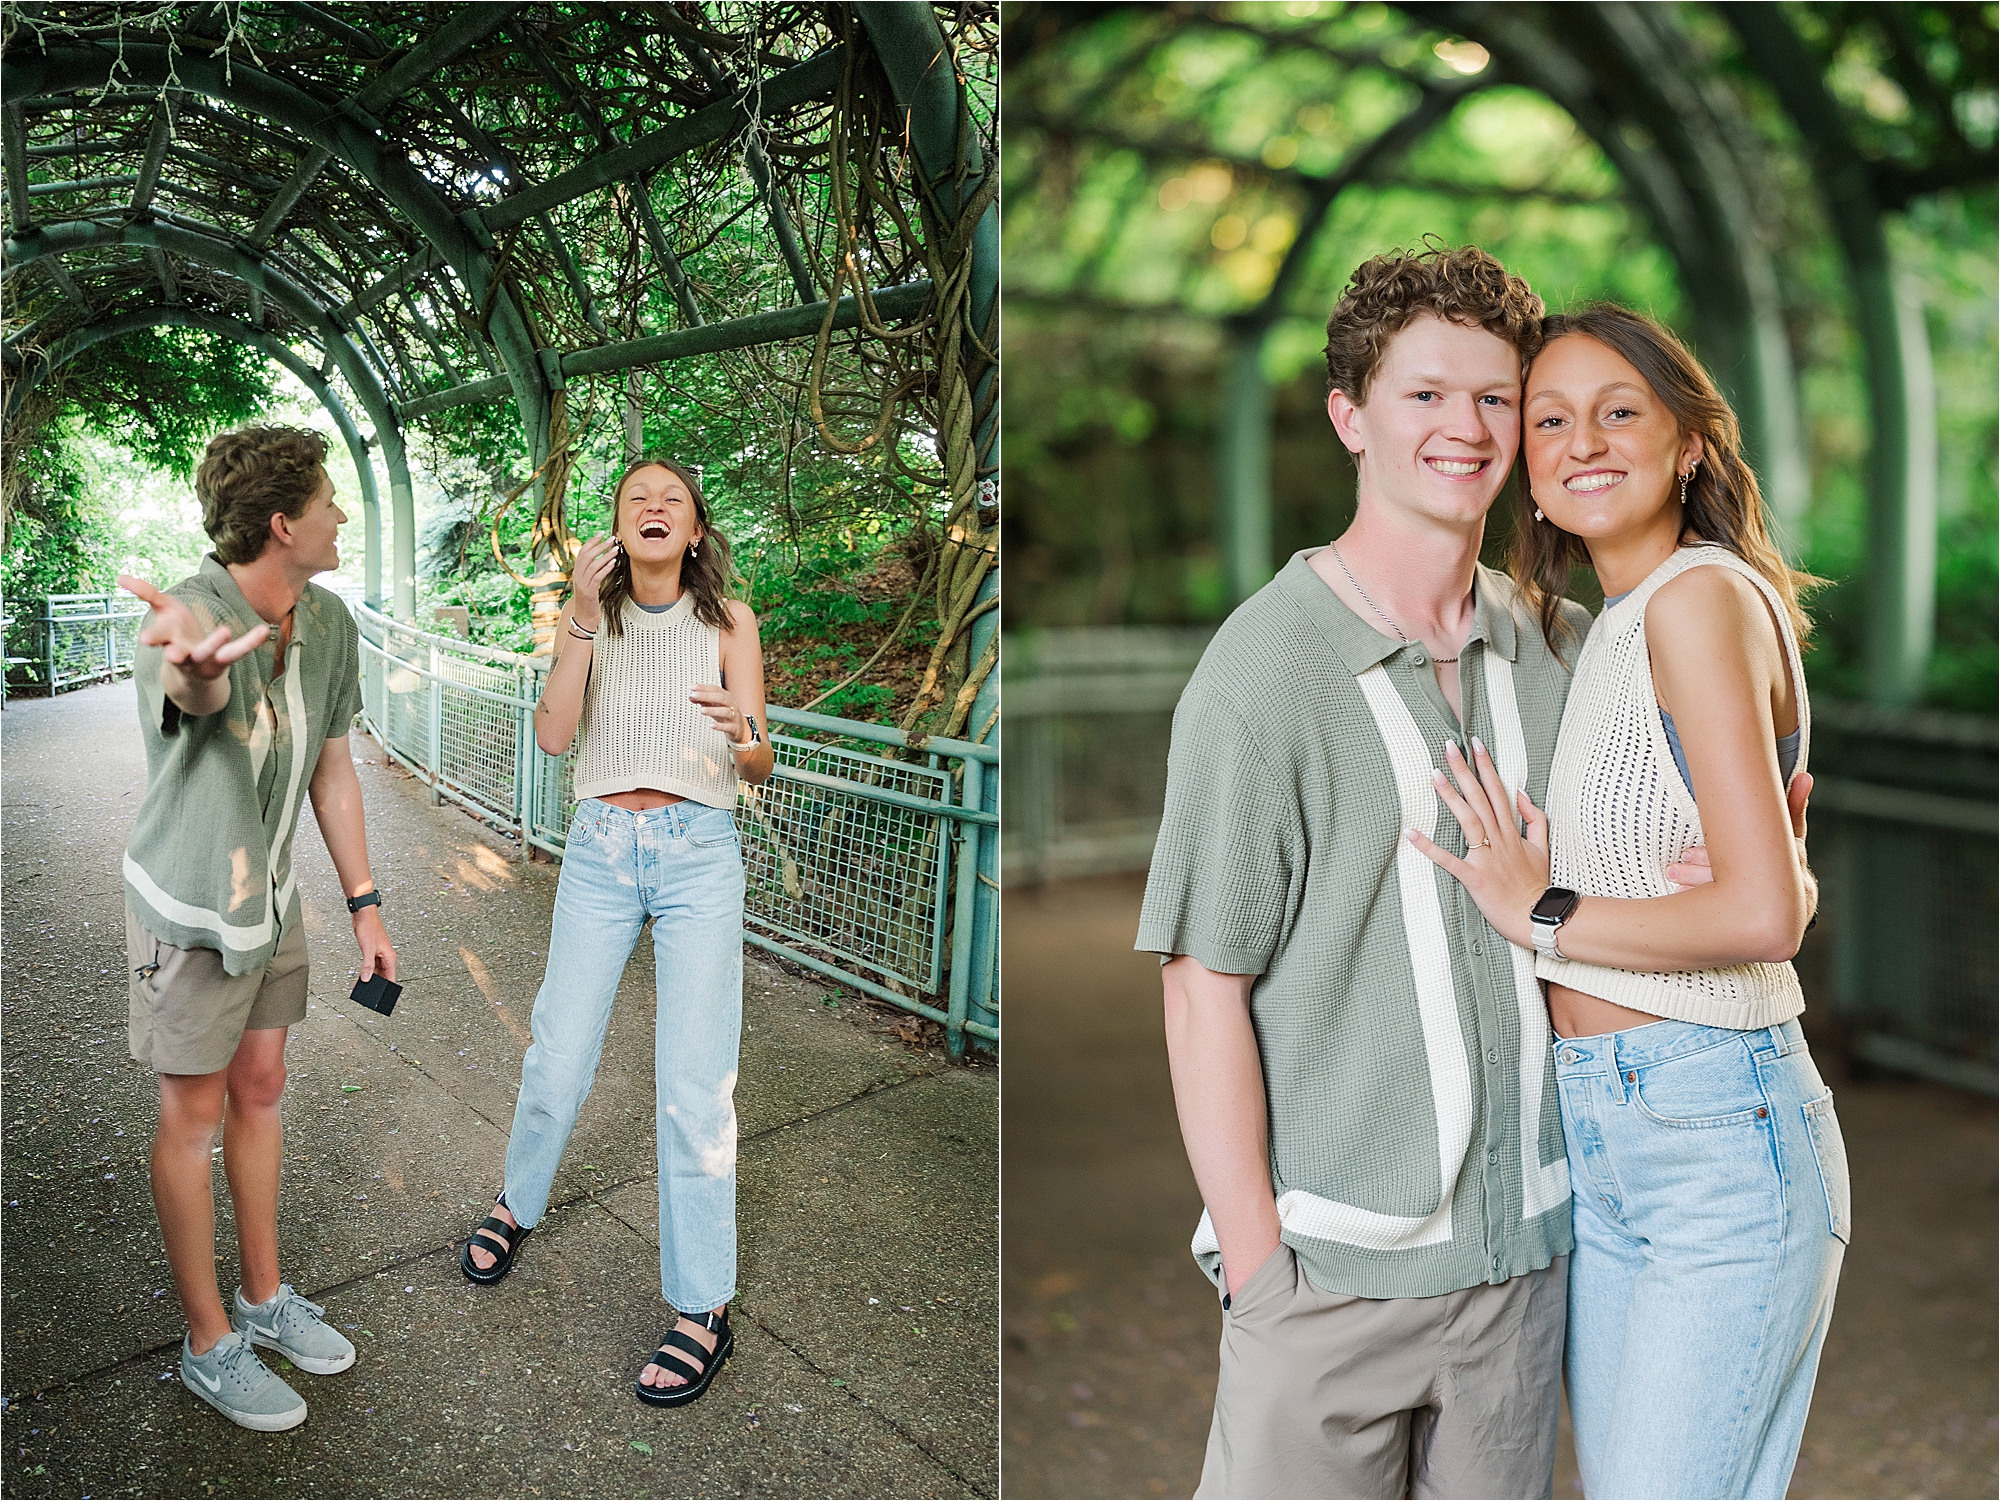 pittsburgh surprise proposal photographer • A Surprise Proposal at the West End Overlook